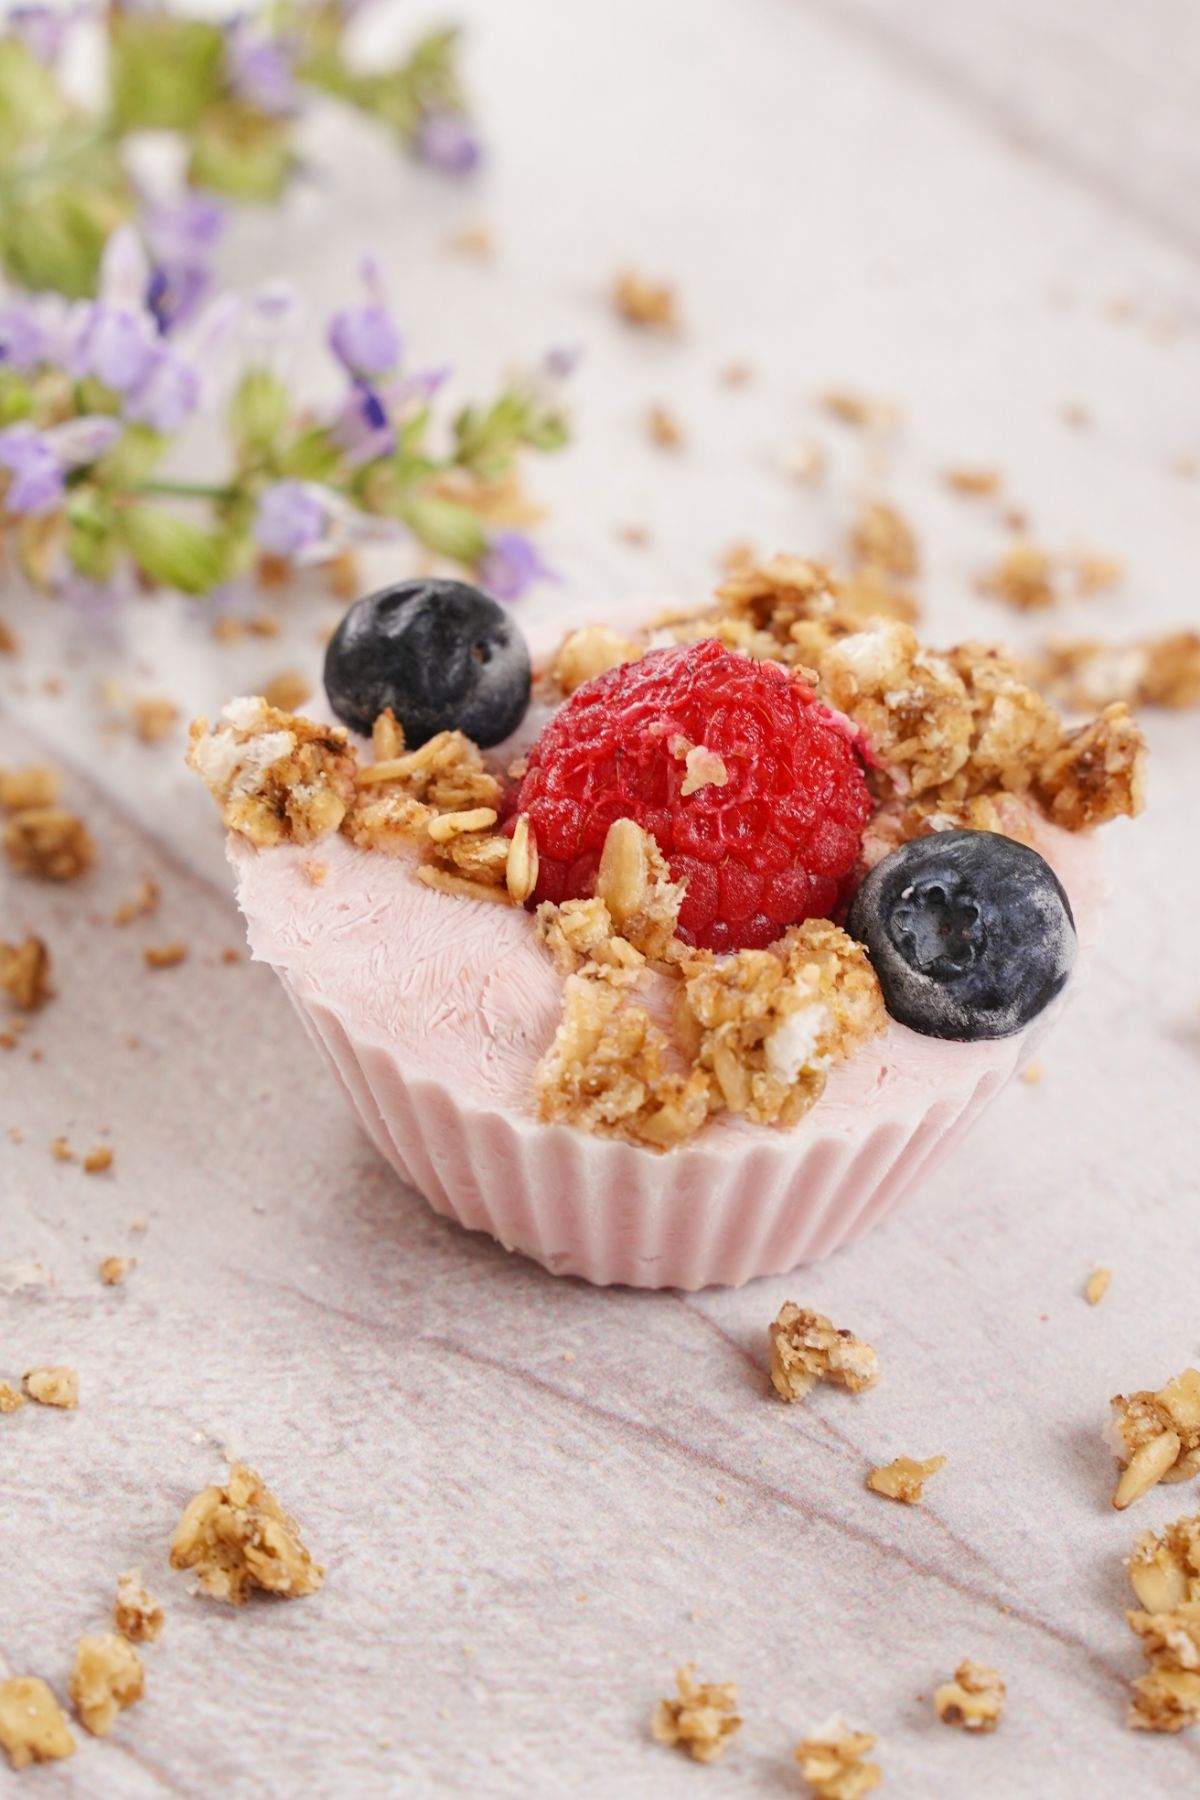 yogurt cup with berries on top sitting on table with granola bits